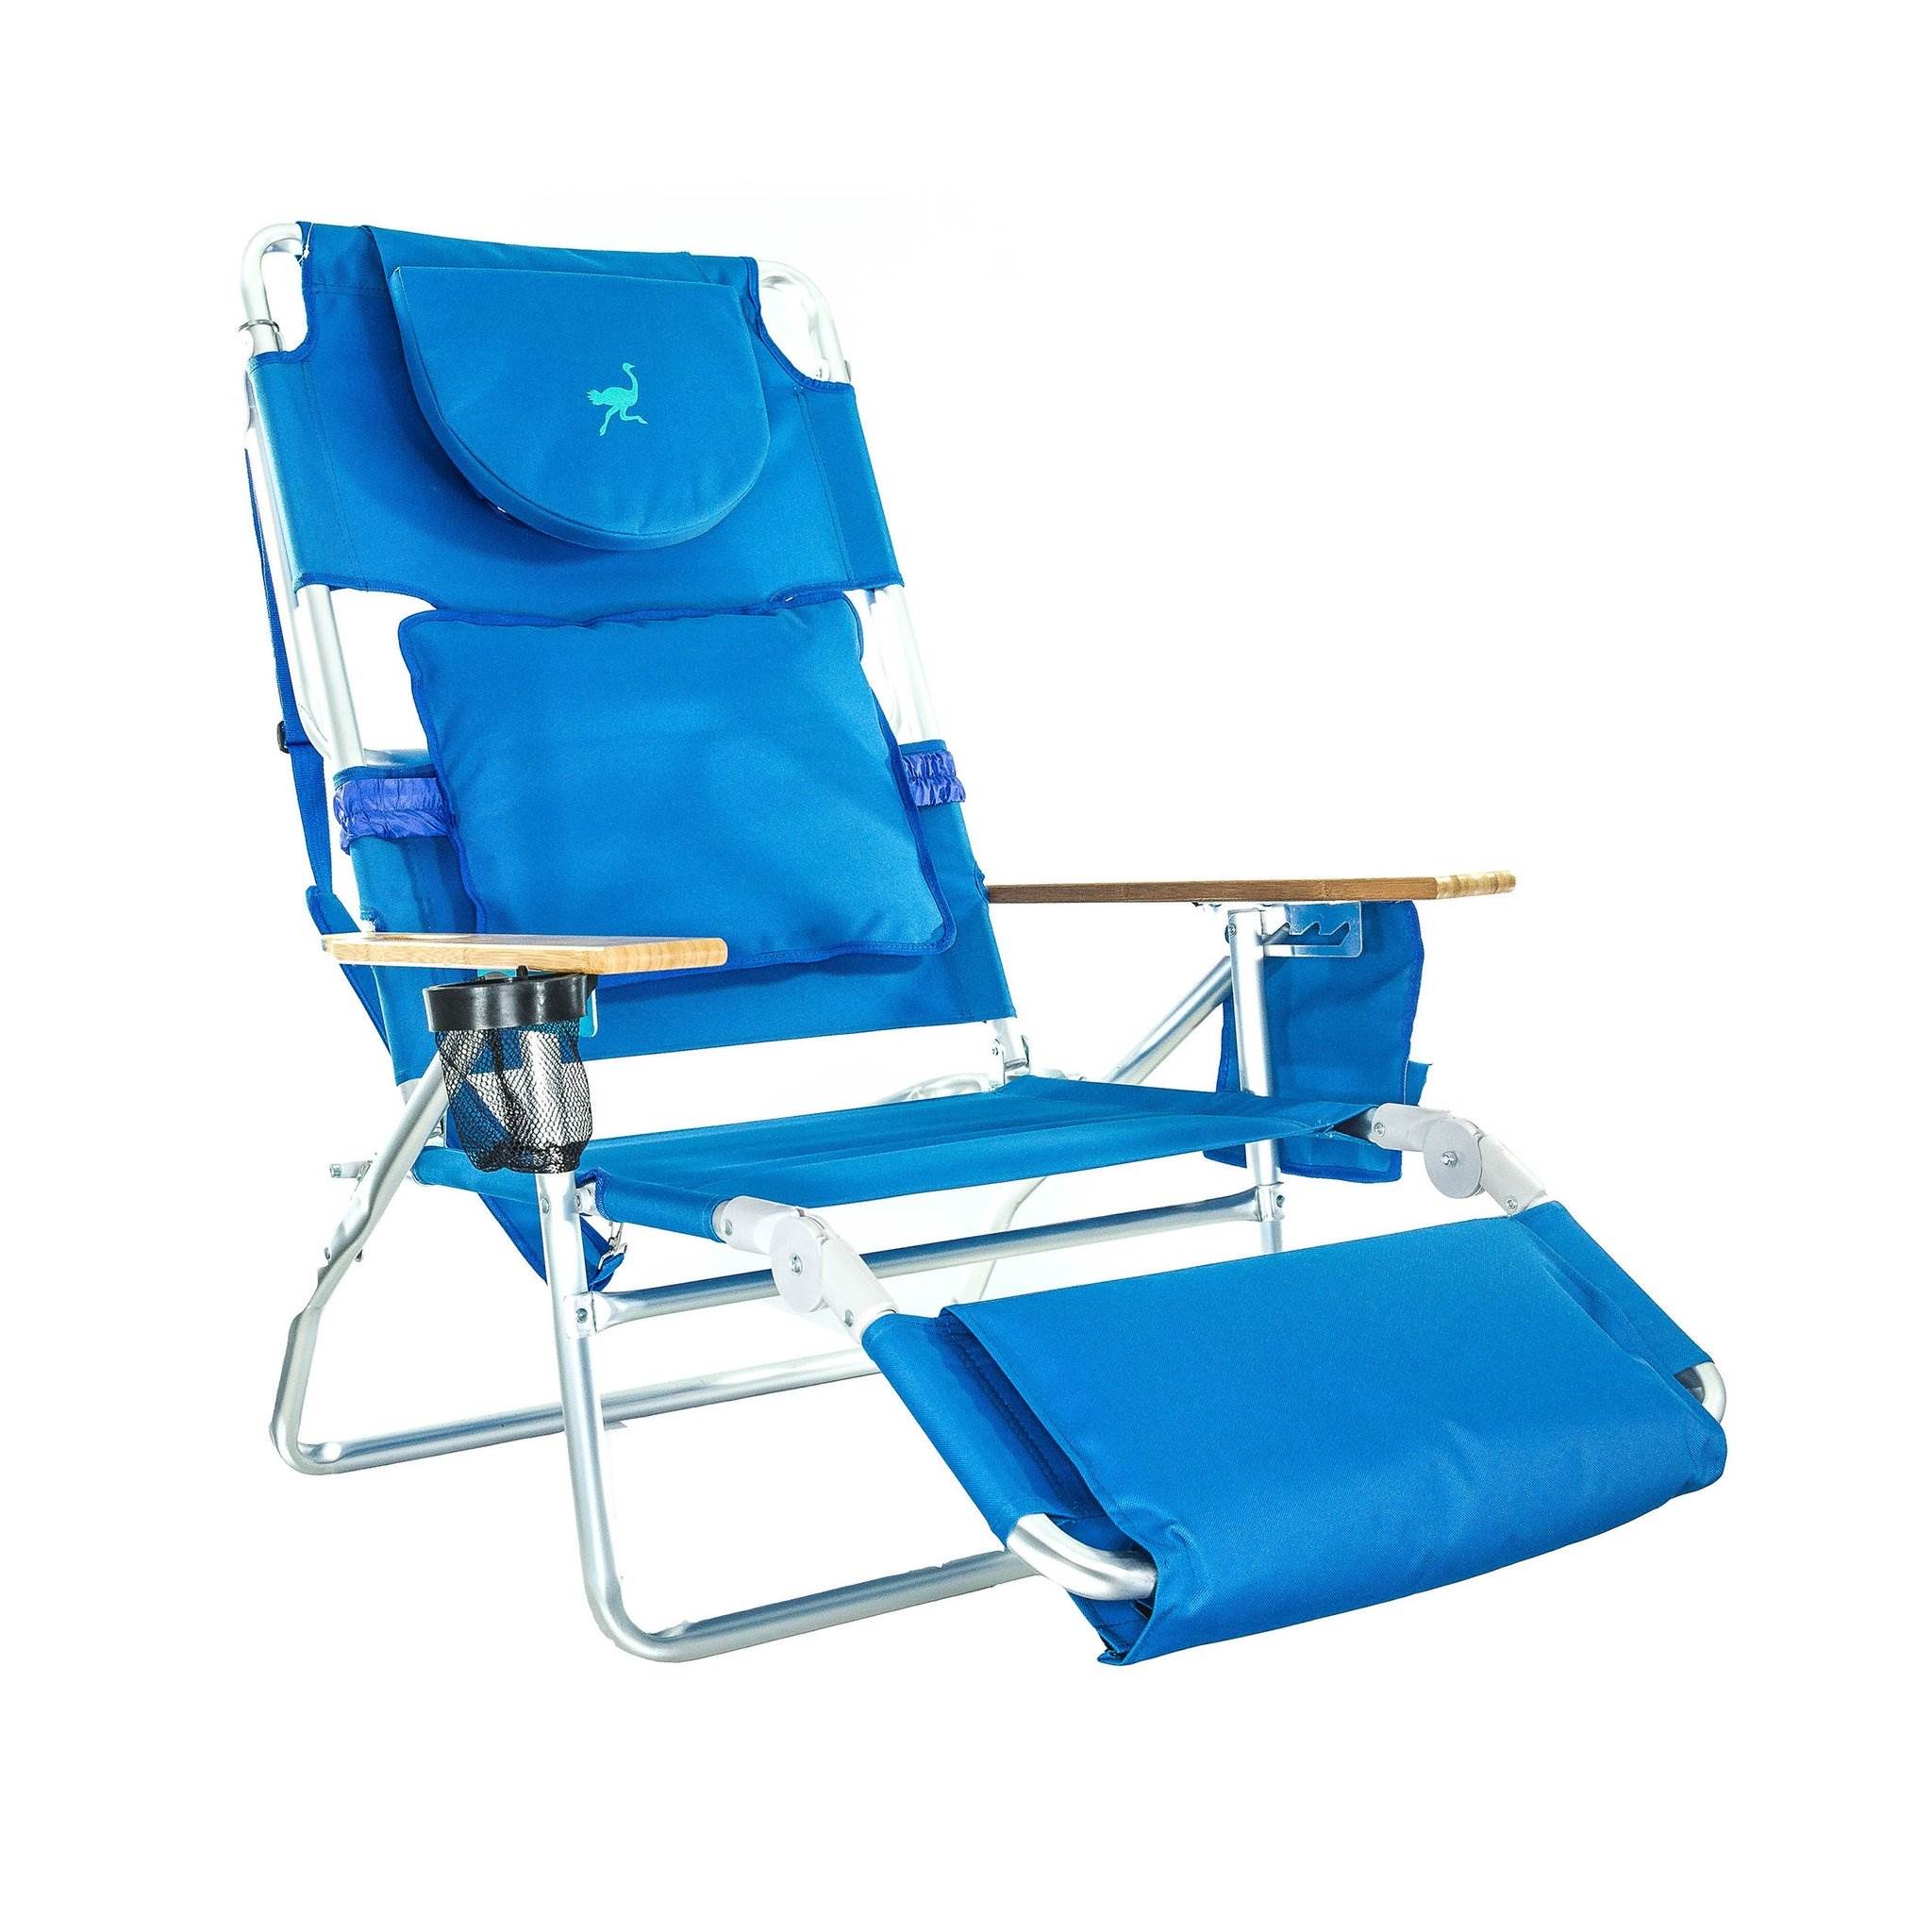 Minimalist Ostrich Beach Chair Replacement Parts for Large Space